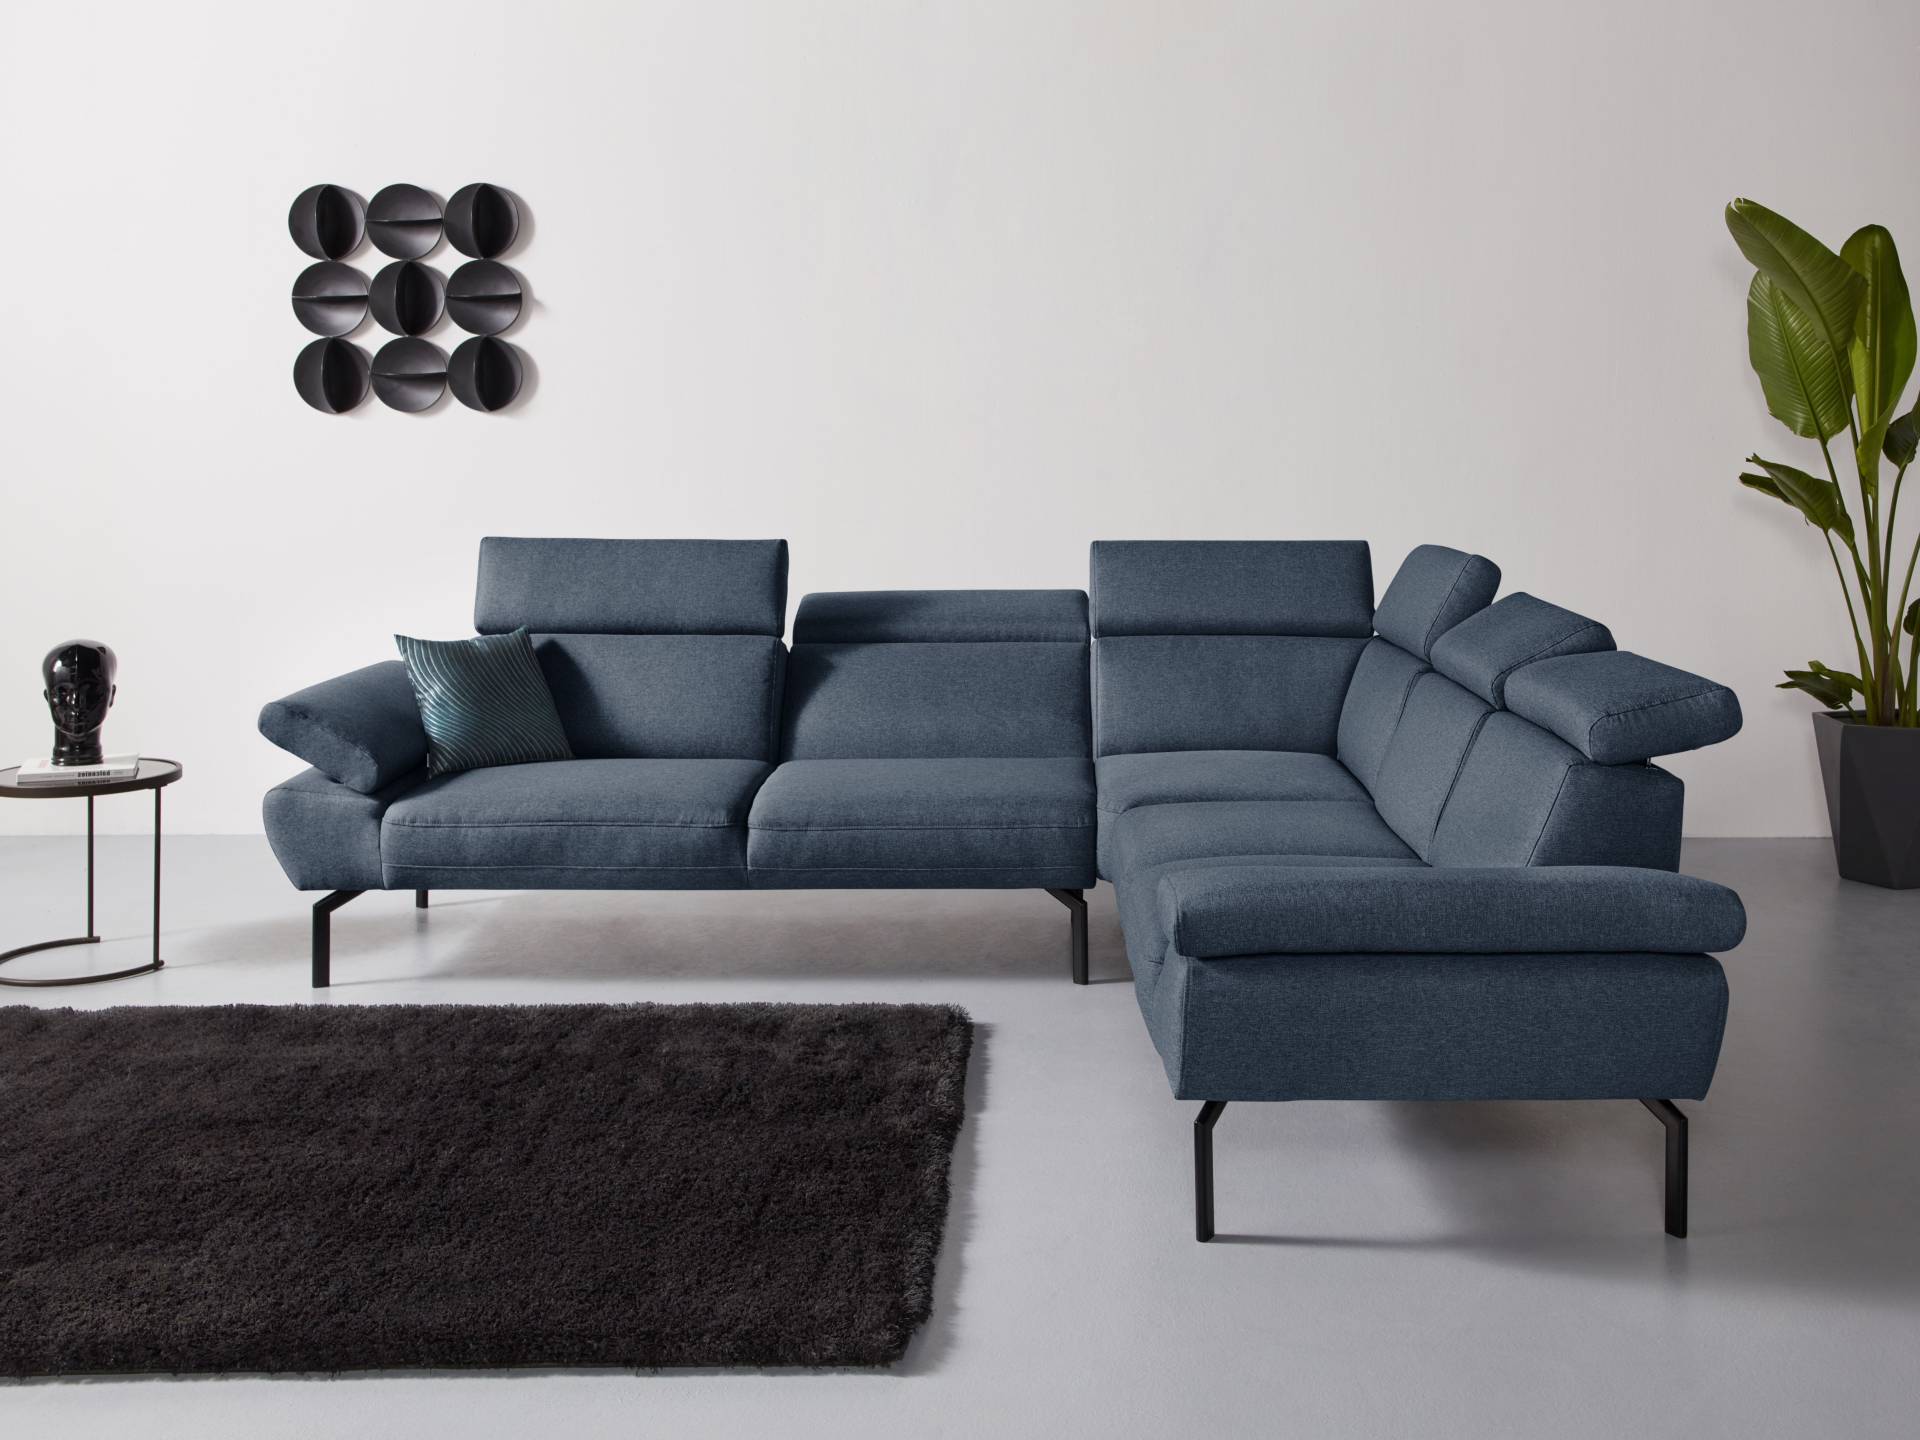 Places of Style Ecksofa »Trapino Luxus L-Form« von PLACES OF STYLE